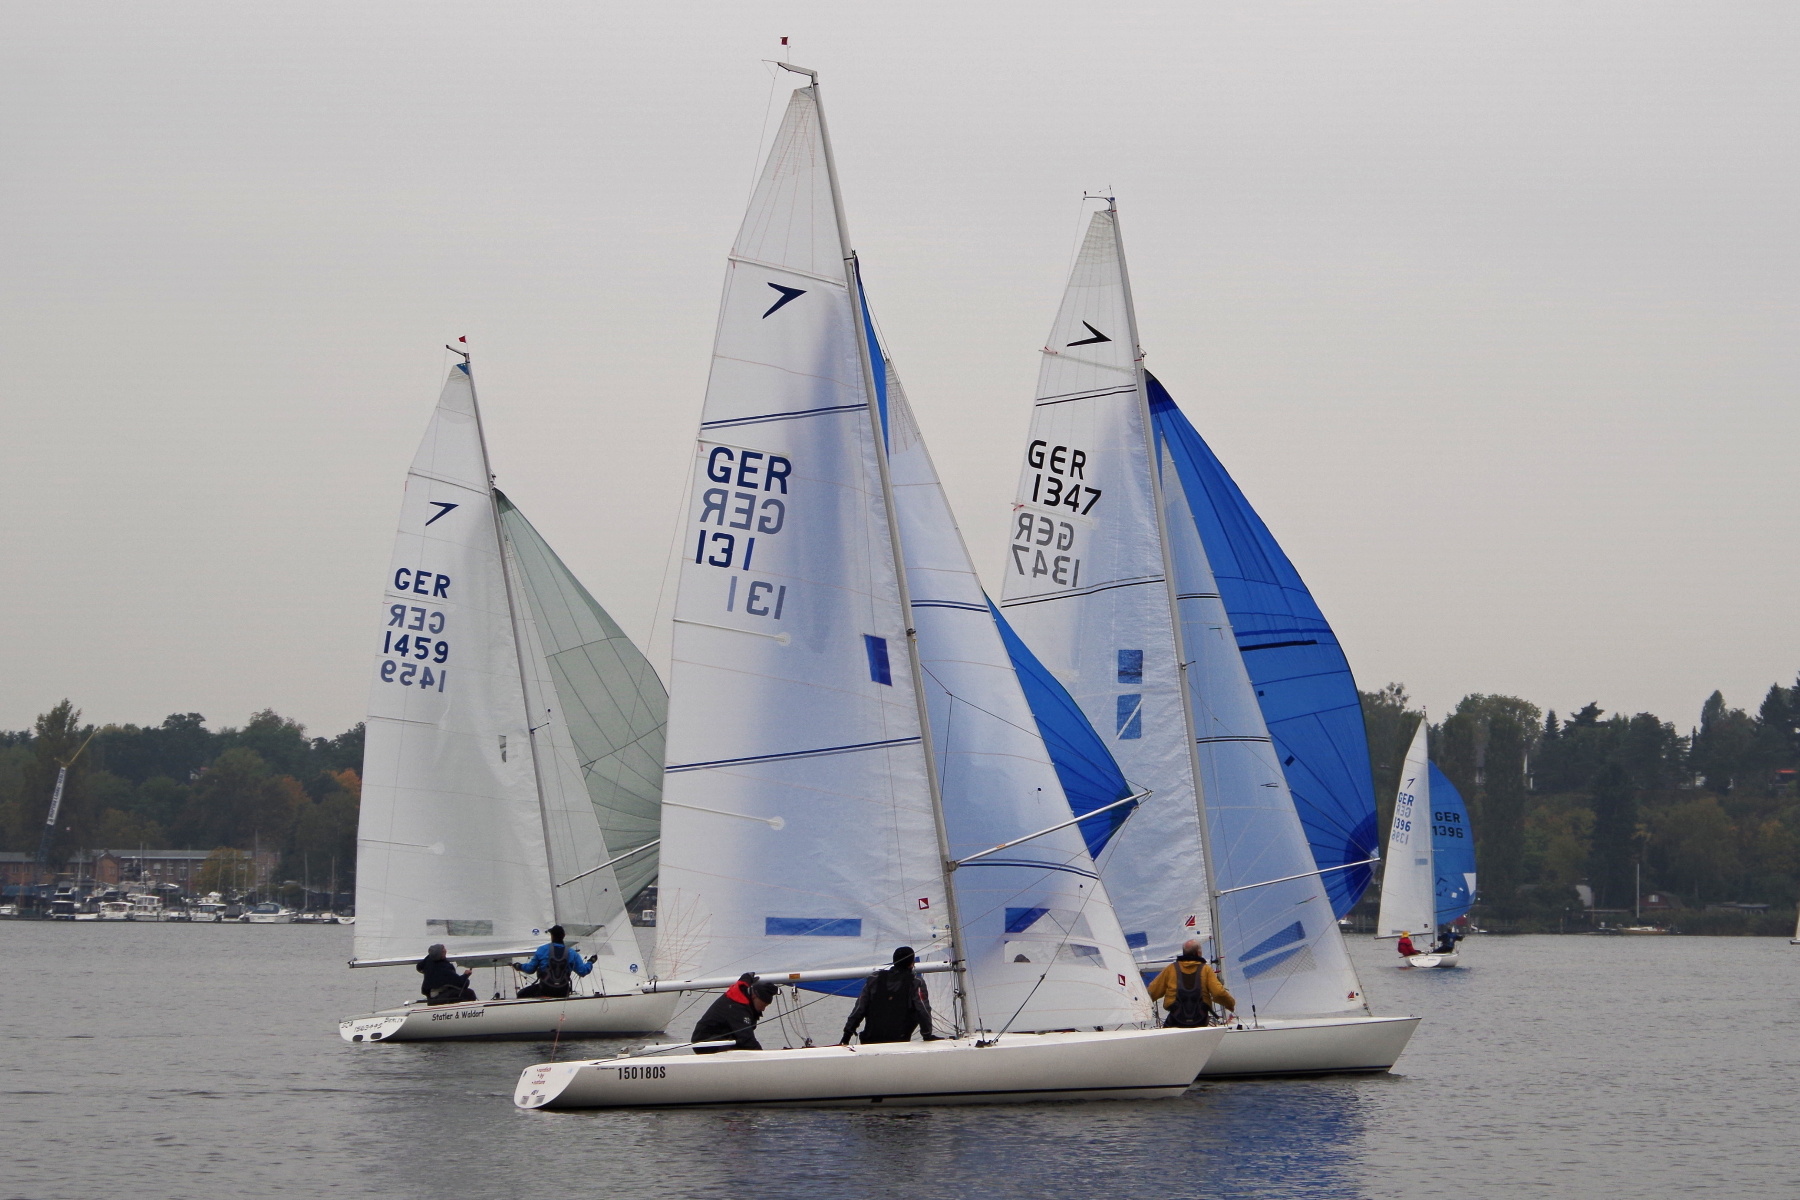  J/70, Dyas  May Opening  Tutzing GER  Final results, the Swiss